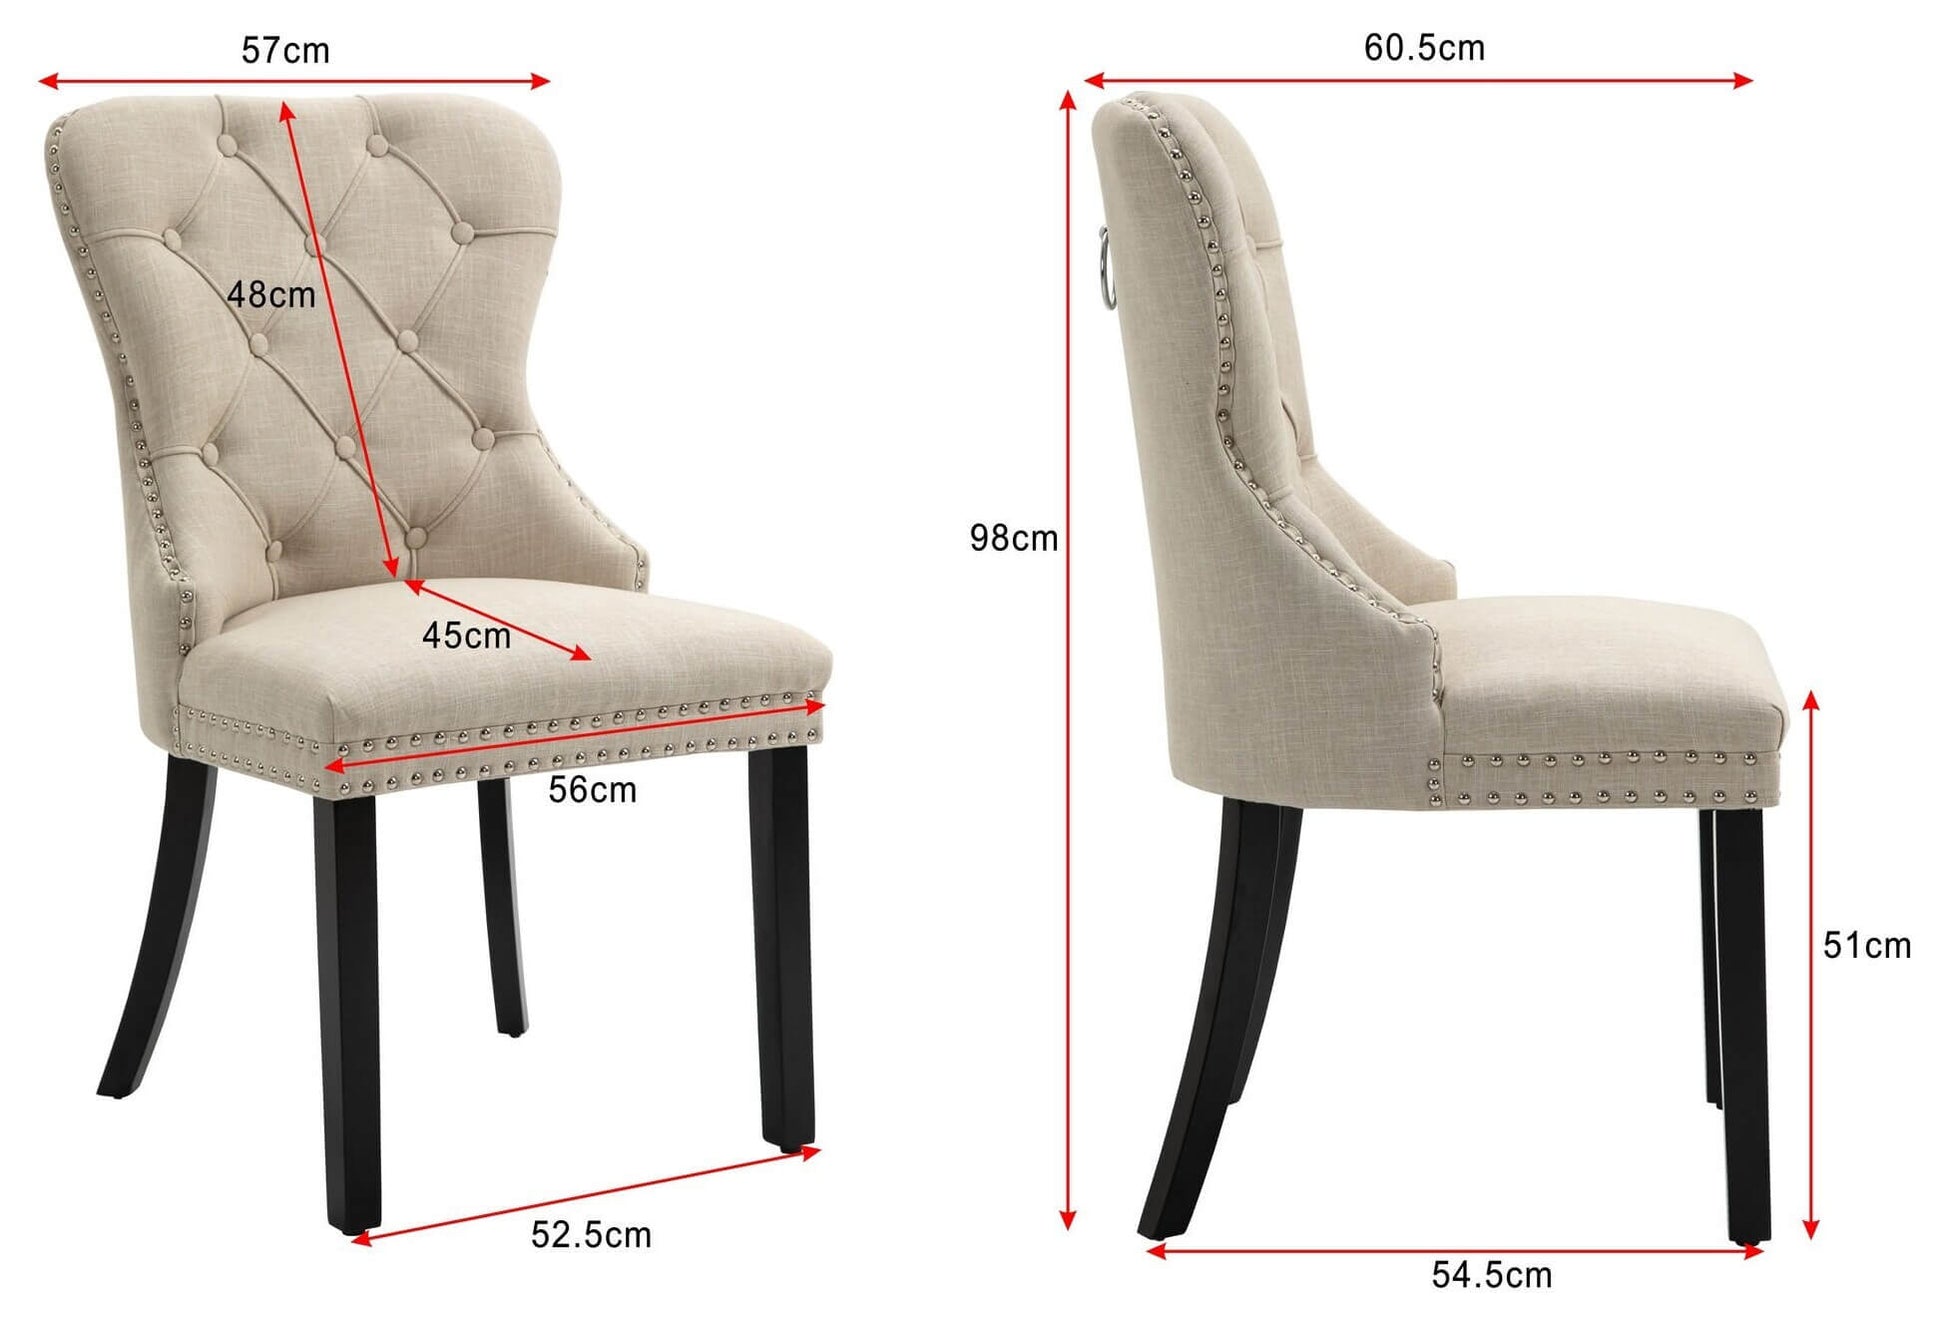 Genoa Version 2 | Beige Fabric French Provincial Wooden Dining Chairs | Set of 2 | Beige